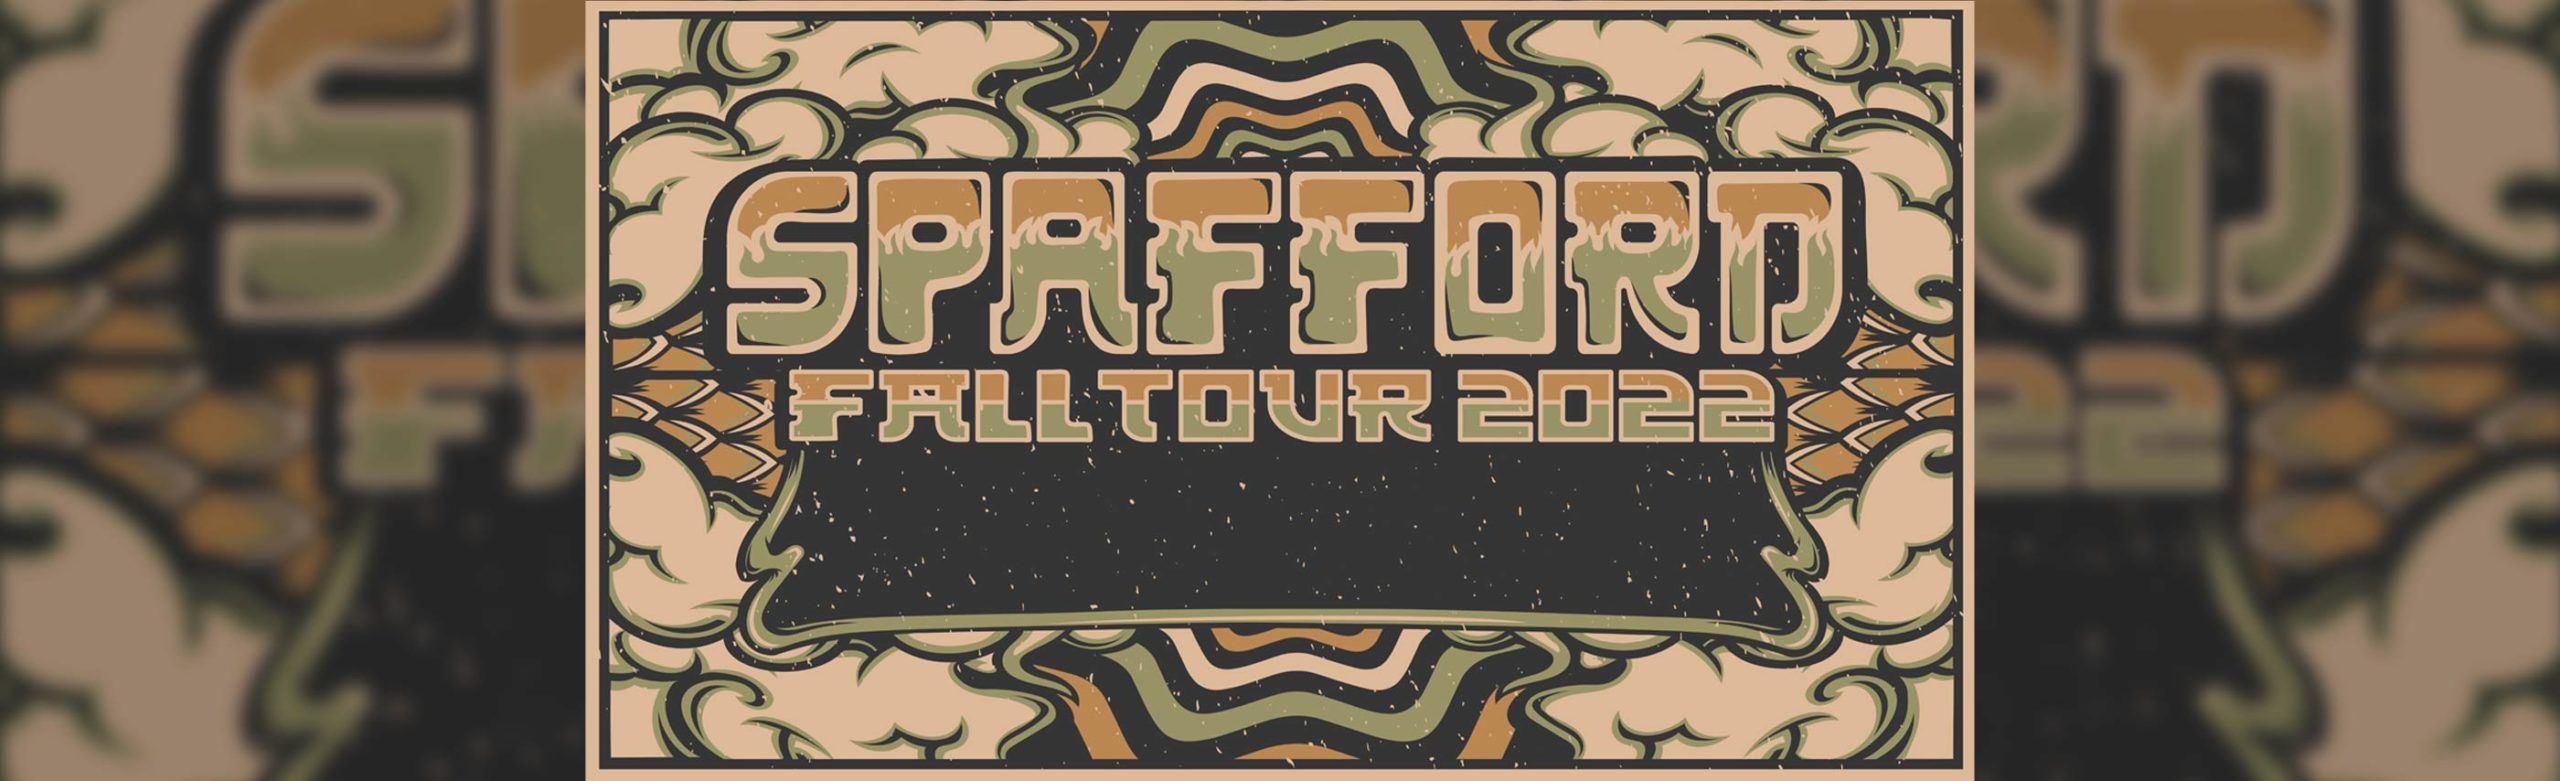 Event Info: Spafford at The ELM 2022 Image